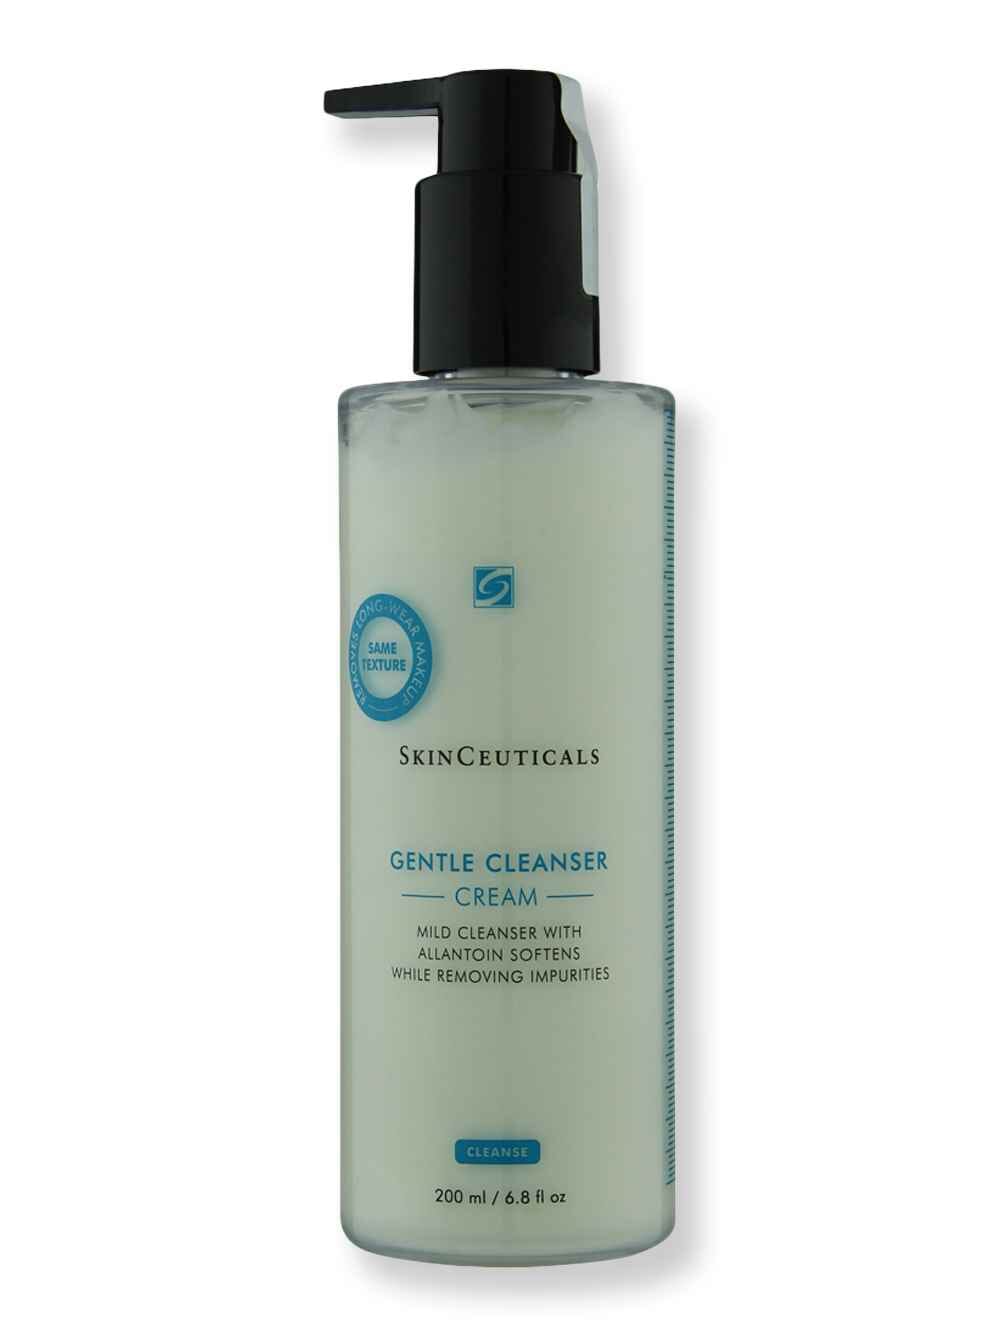 SkinCeuticals SkinCeuticals Gentle Cleanser 200 ml Face Cleansers 